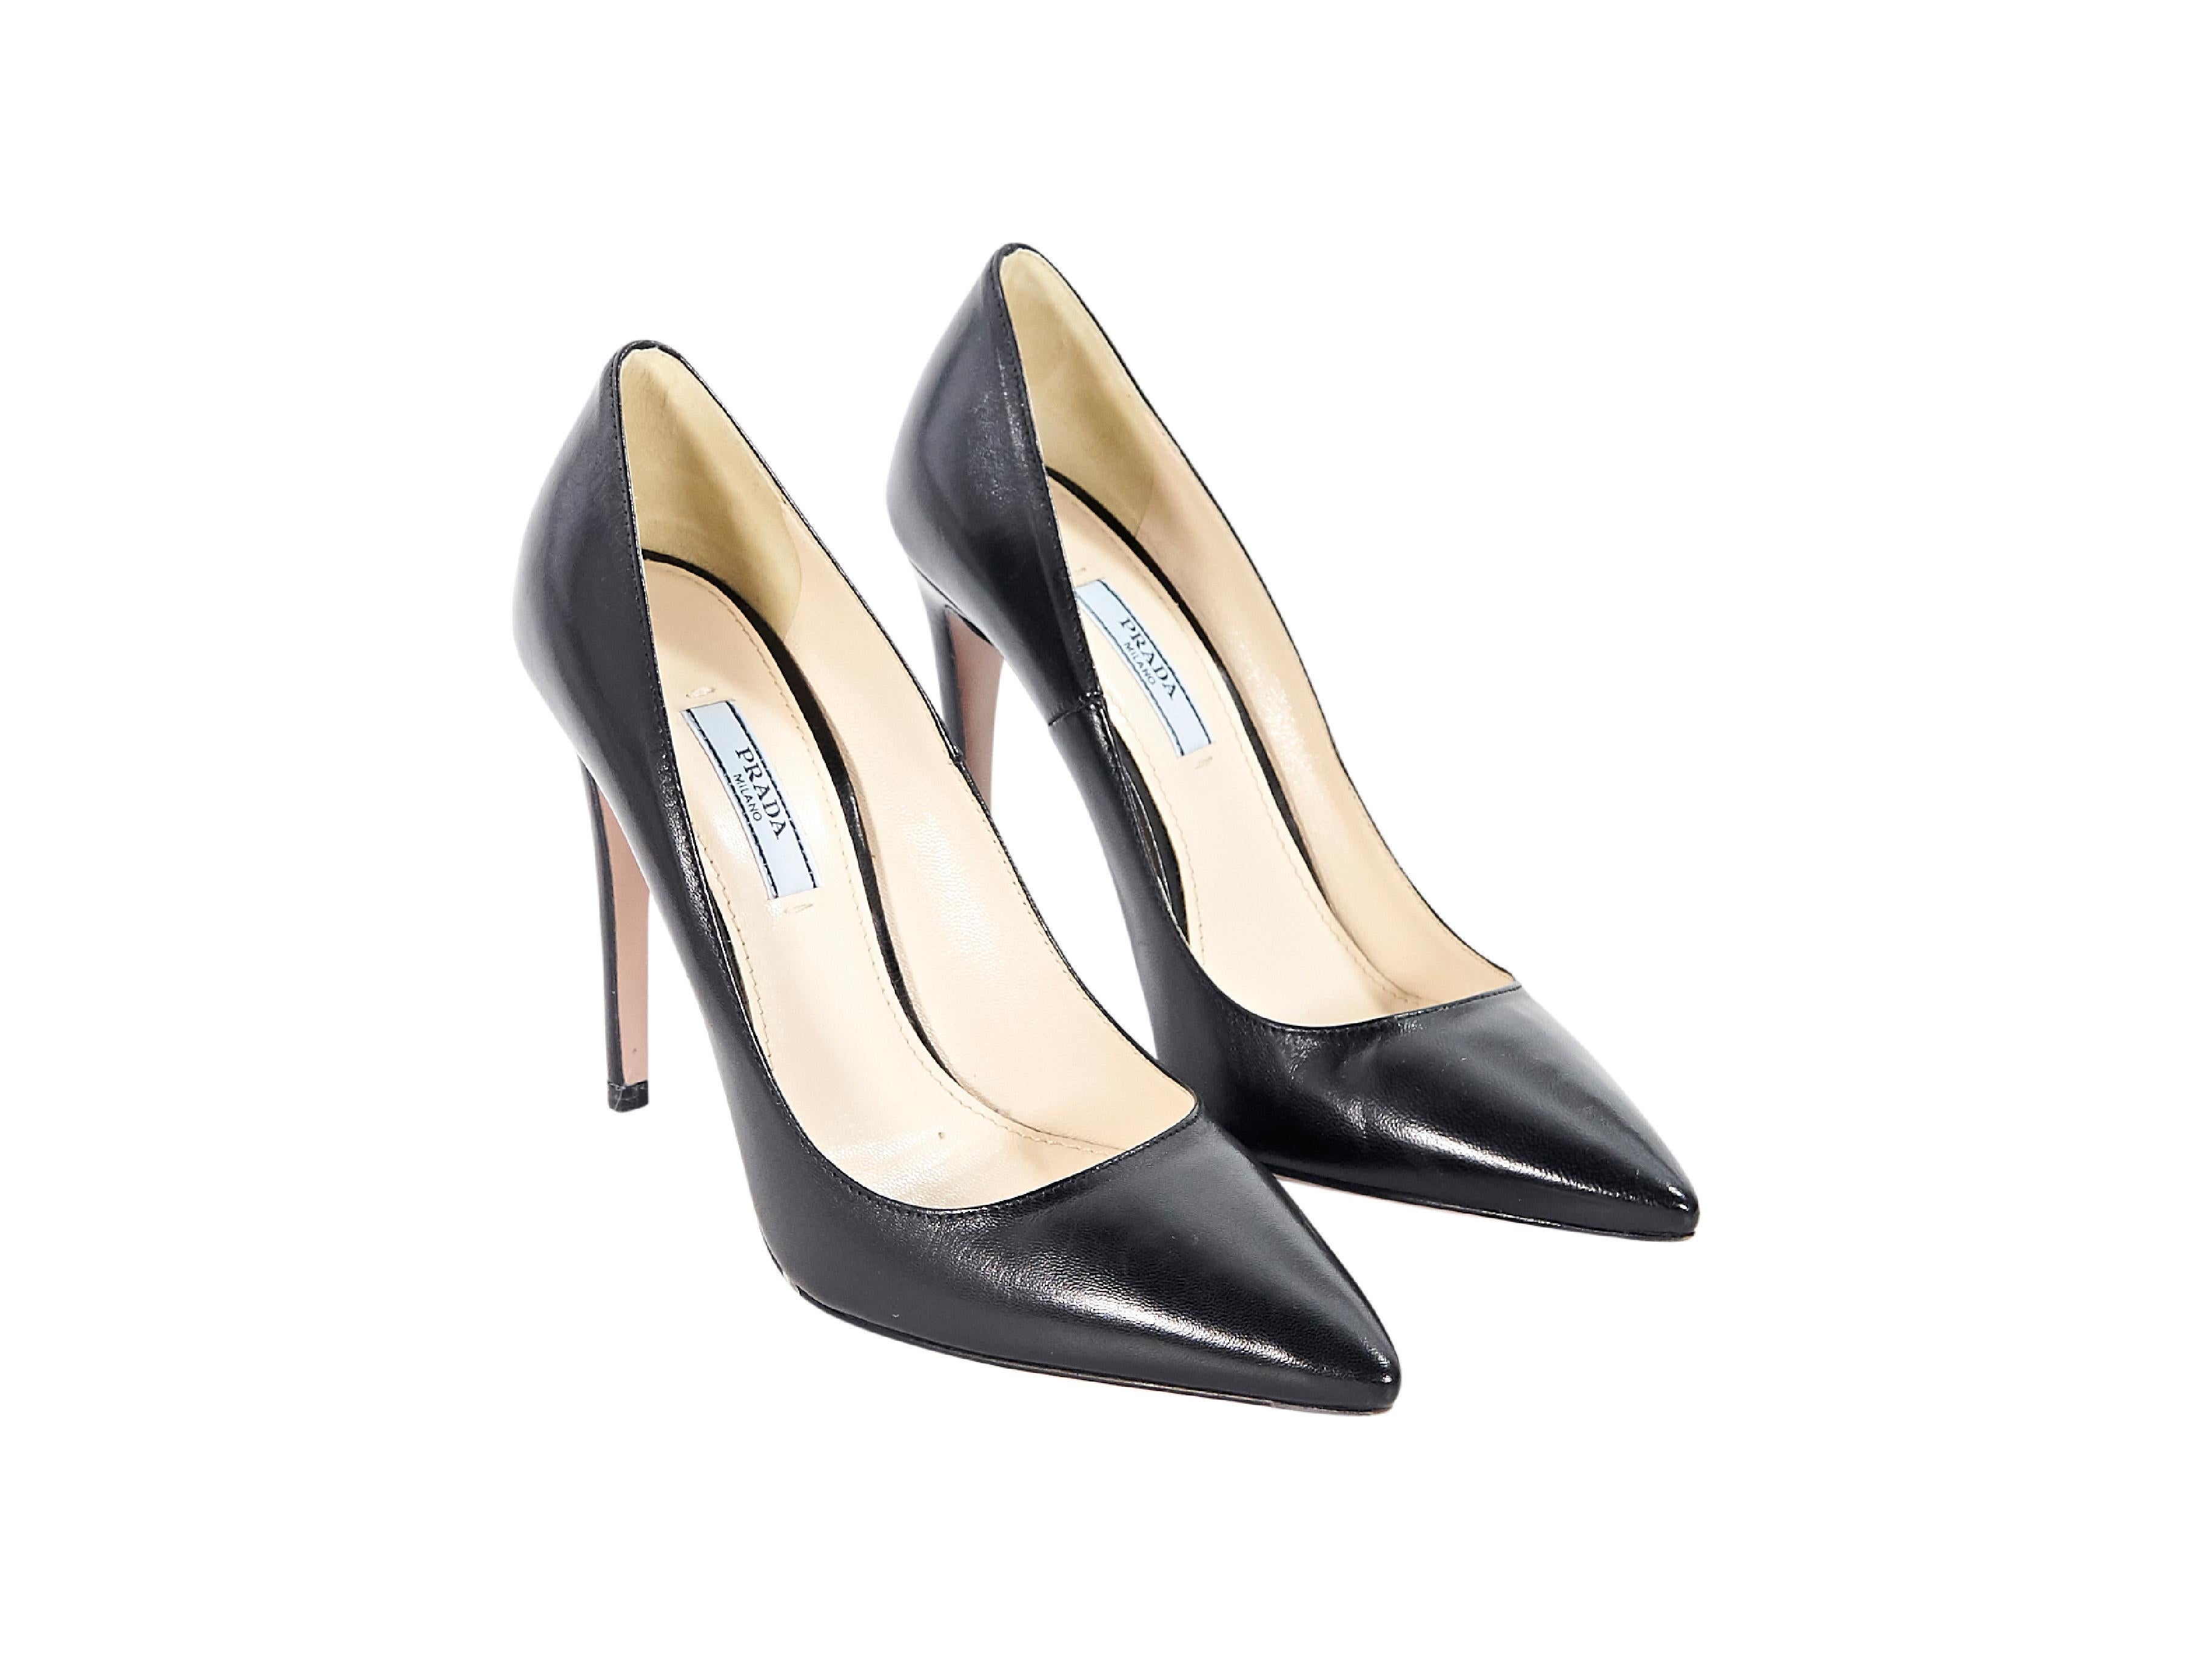 Product details:  Black leather pumps by Prada.  Point toe.  Slip-on style.  4.5